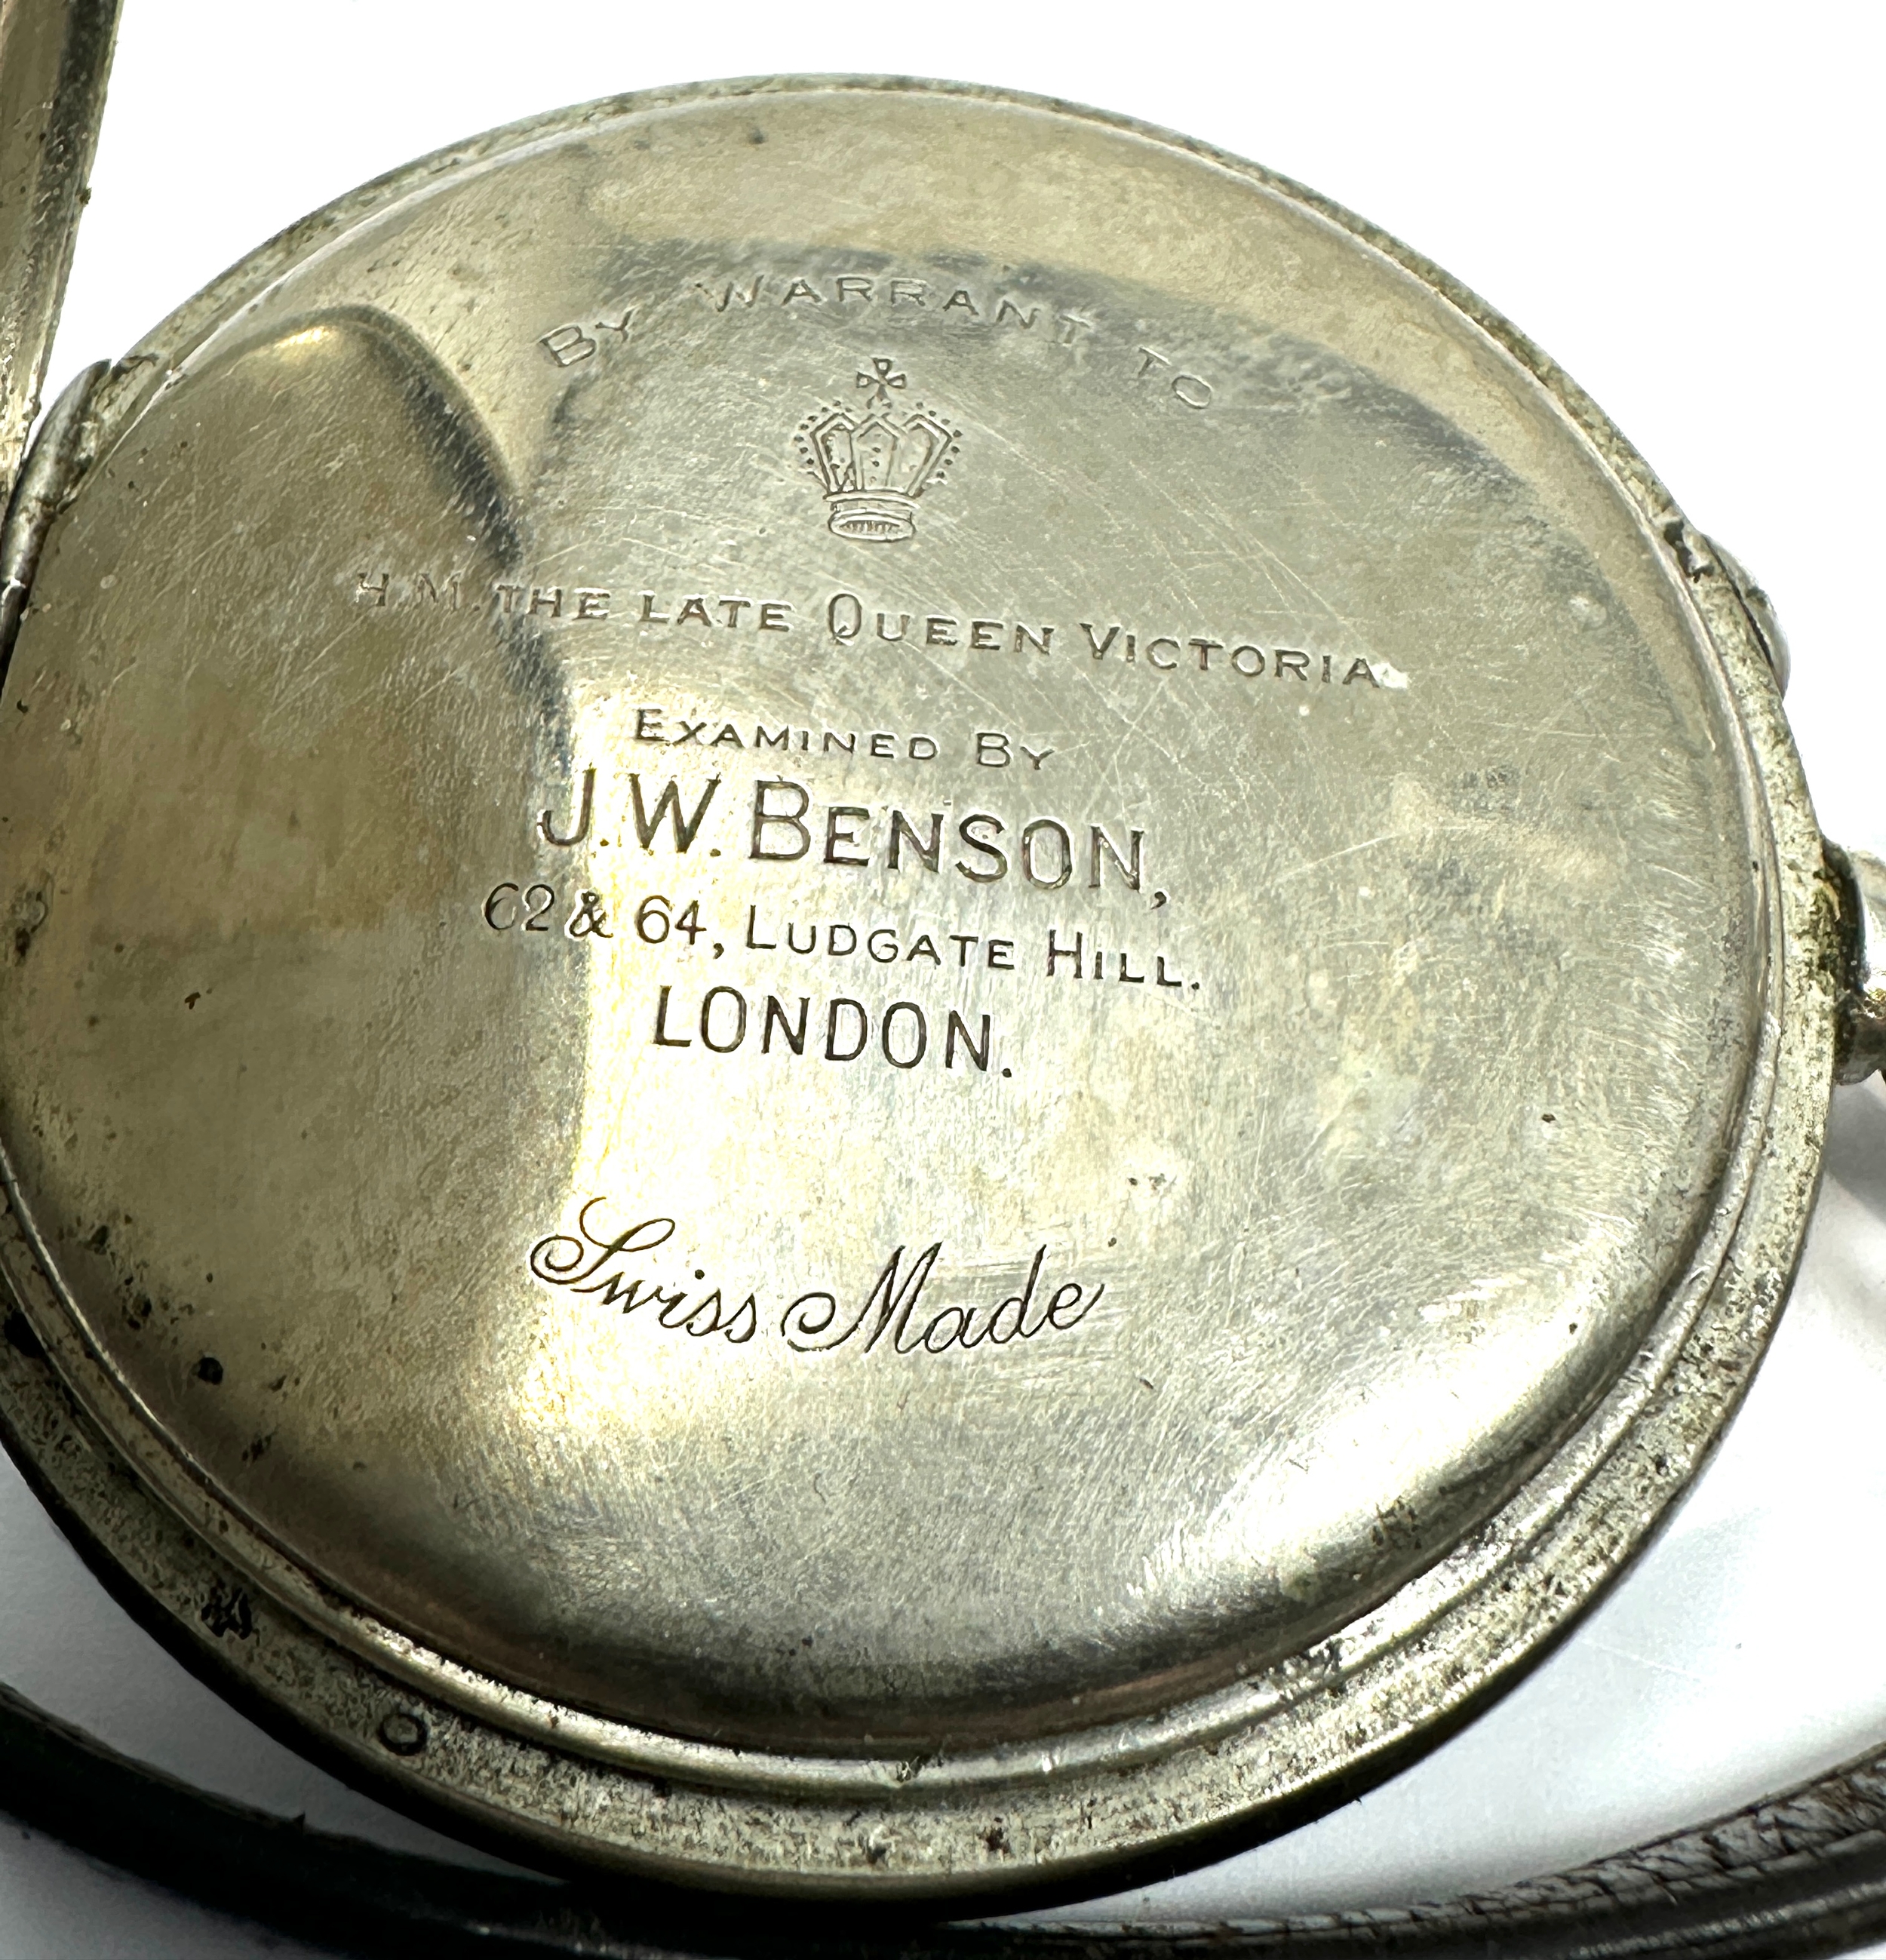 Antique military arrow marked open face pocket watch j.w.benson london the watch is ticking - Image 4 of 5